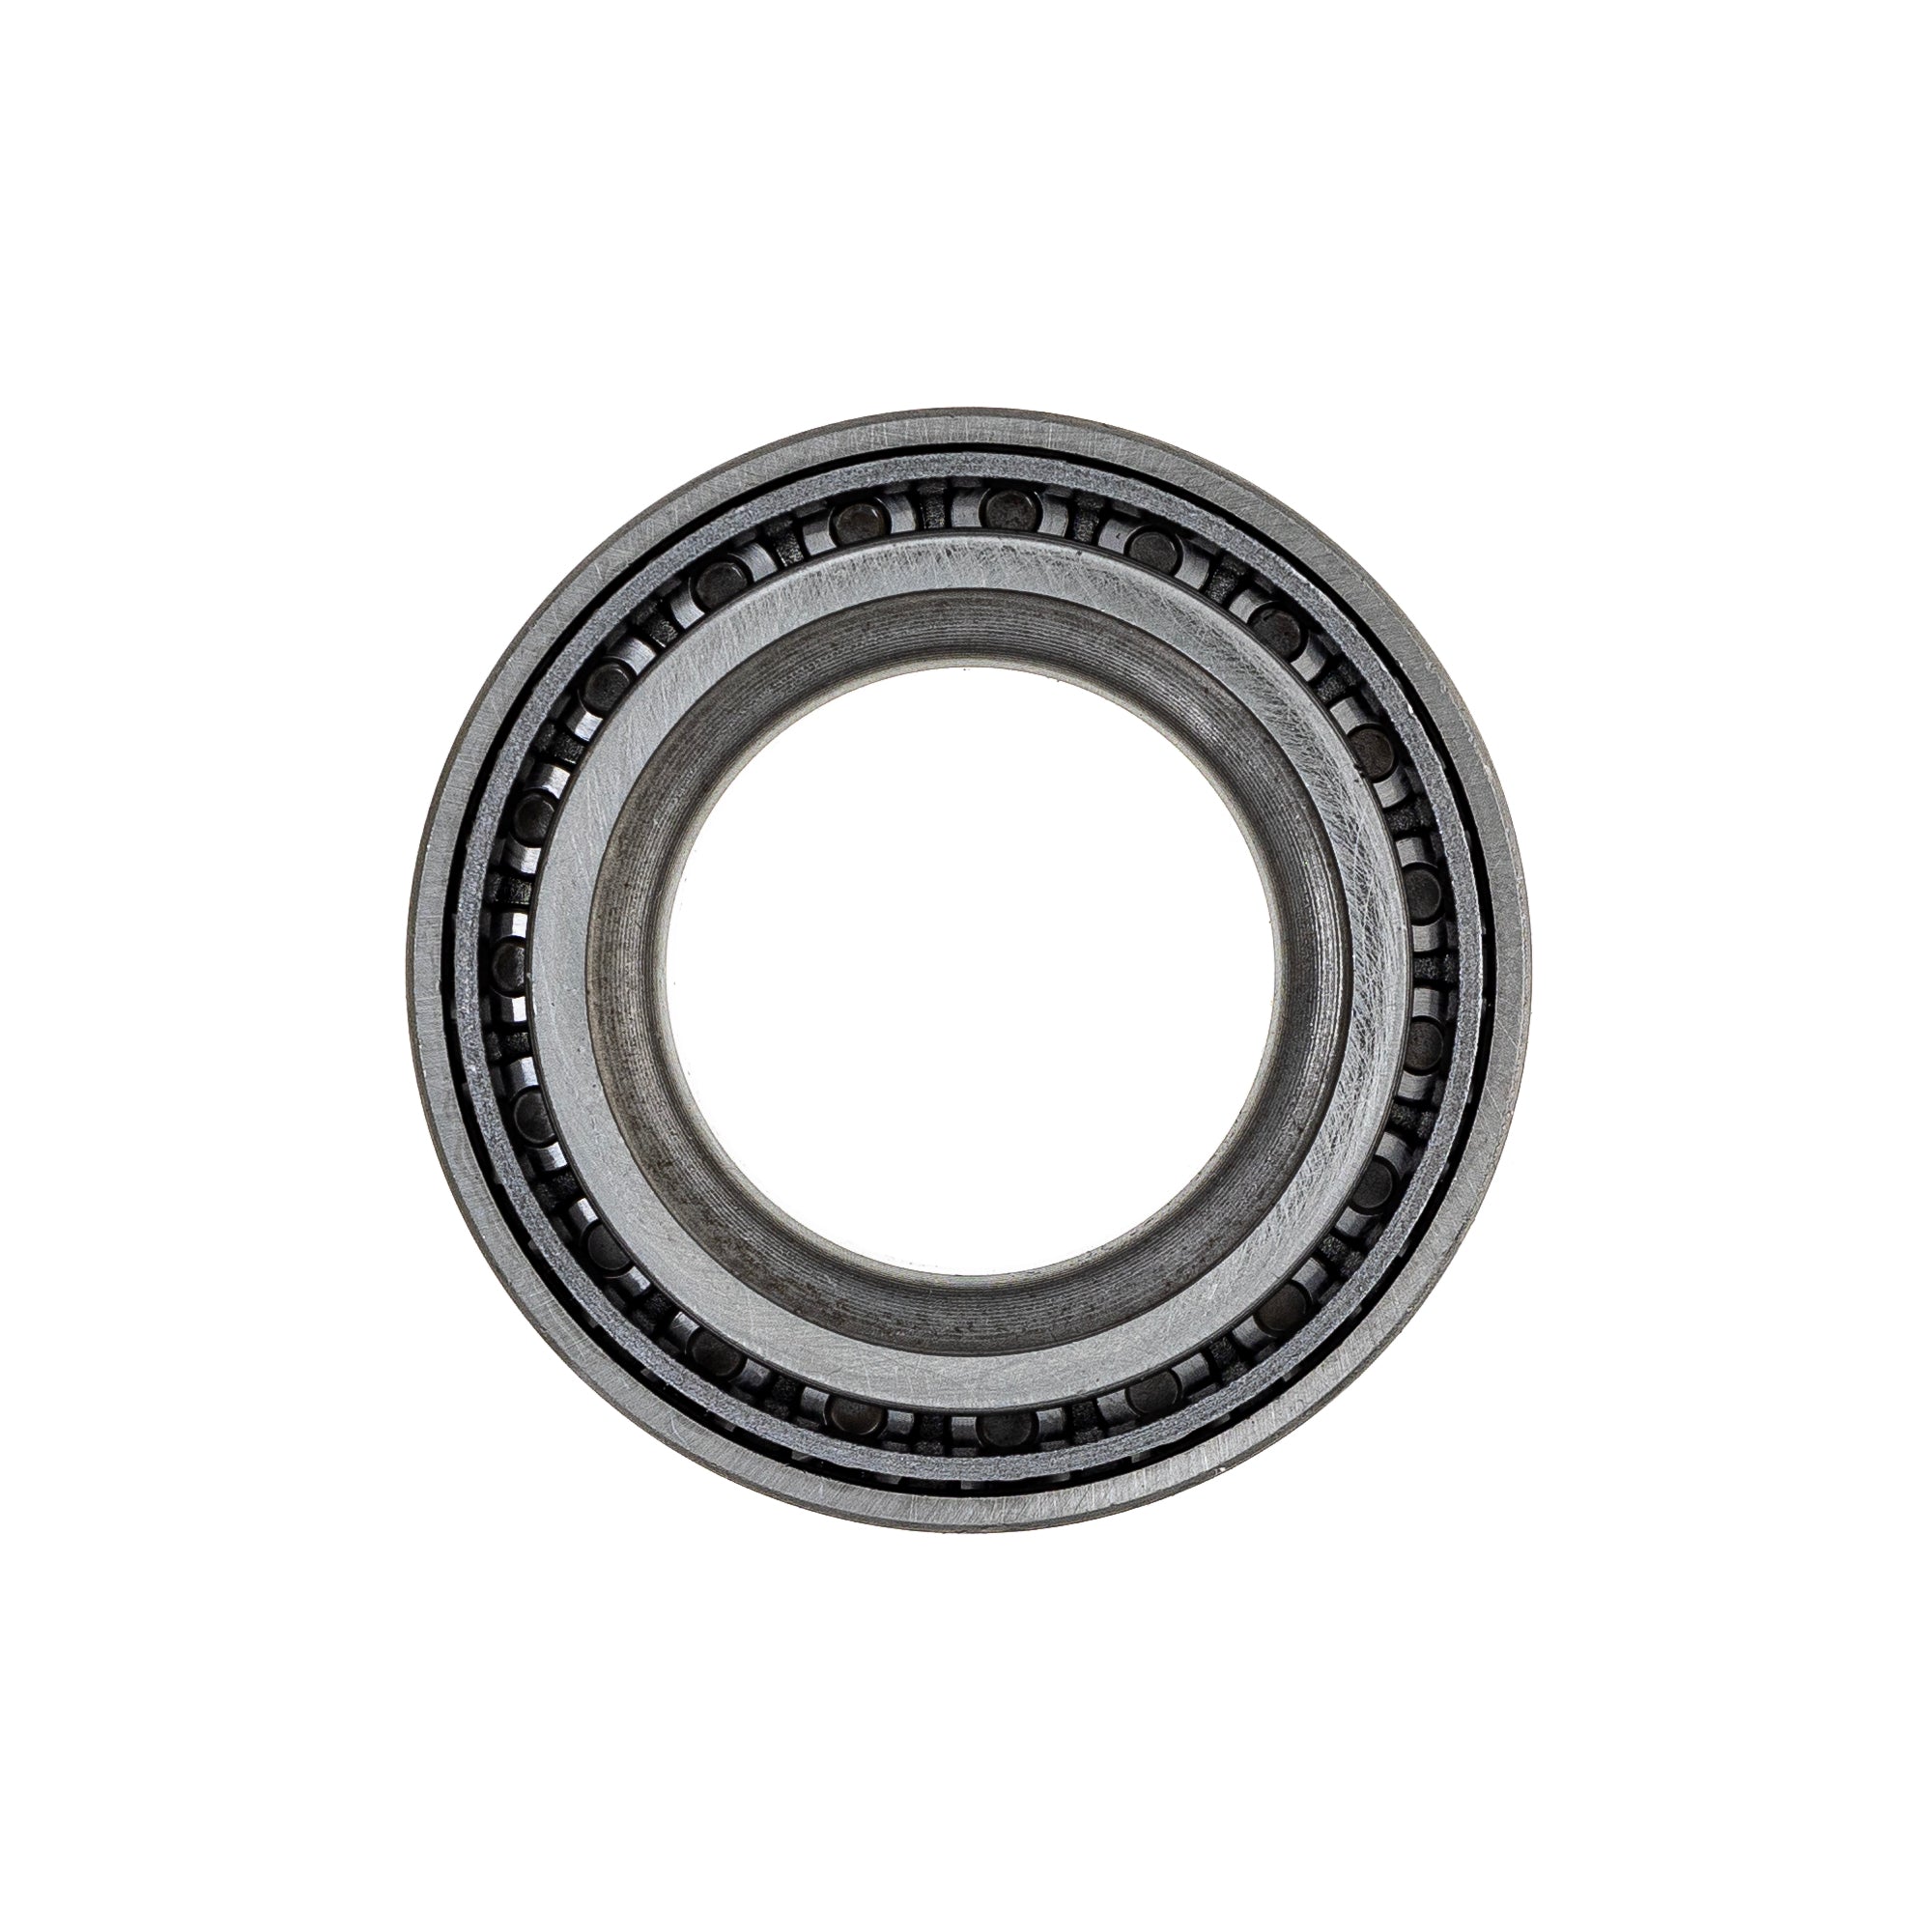 Wheel Bearing 20-1011 27x50.3x15mm Tapered Roller 10 Pack